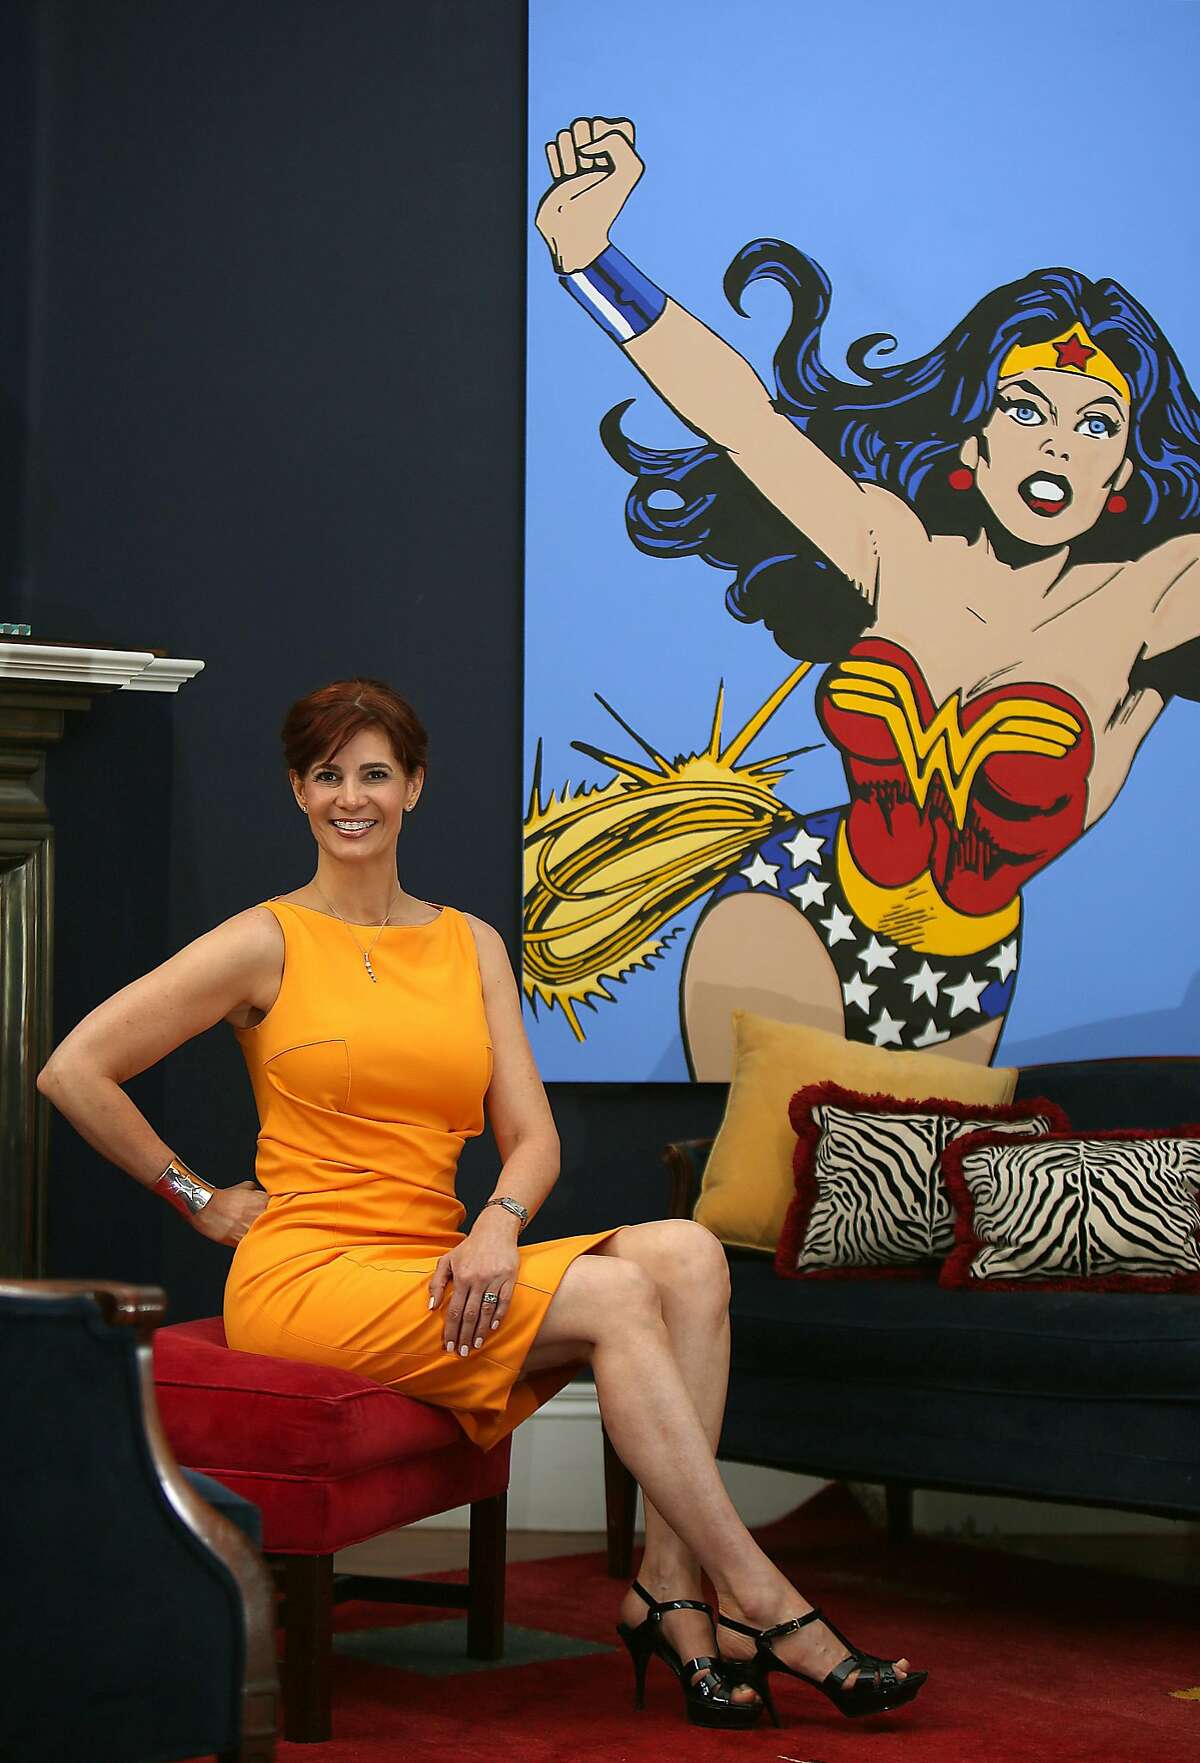 Jenny Dearborn shows her painting of a wonder woman cartoon displayed at home in Palo Alto, California, on Wednesday, February 24, 2016. She has four degrees including Stanford and UC Berkeley, has 75,000 employees worldwide, and paints superheroes in her spare time.